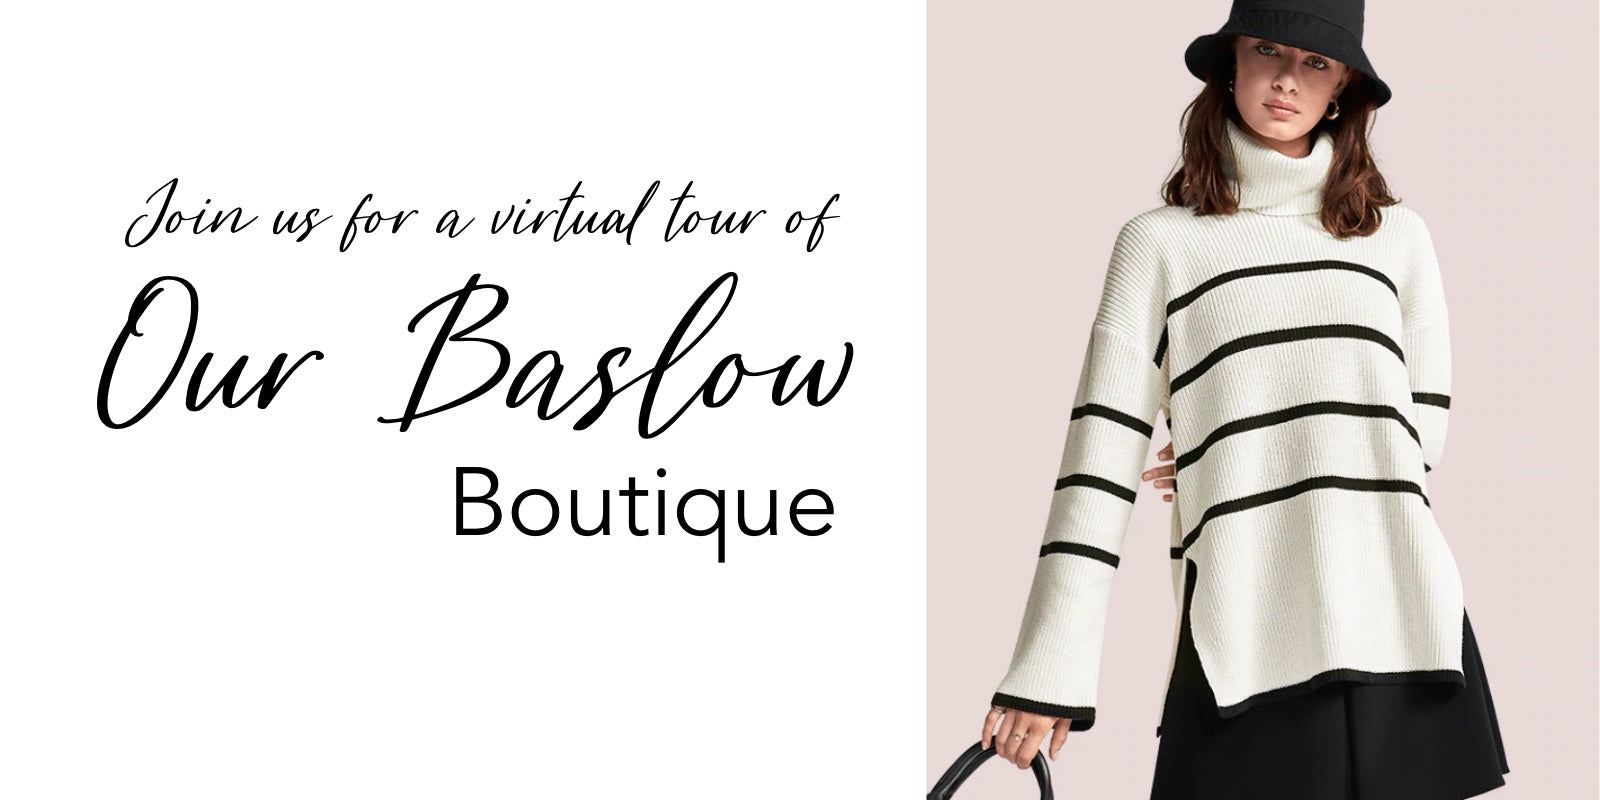 Join us for a tour of our Baslow Boutique!